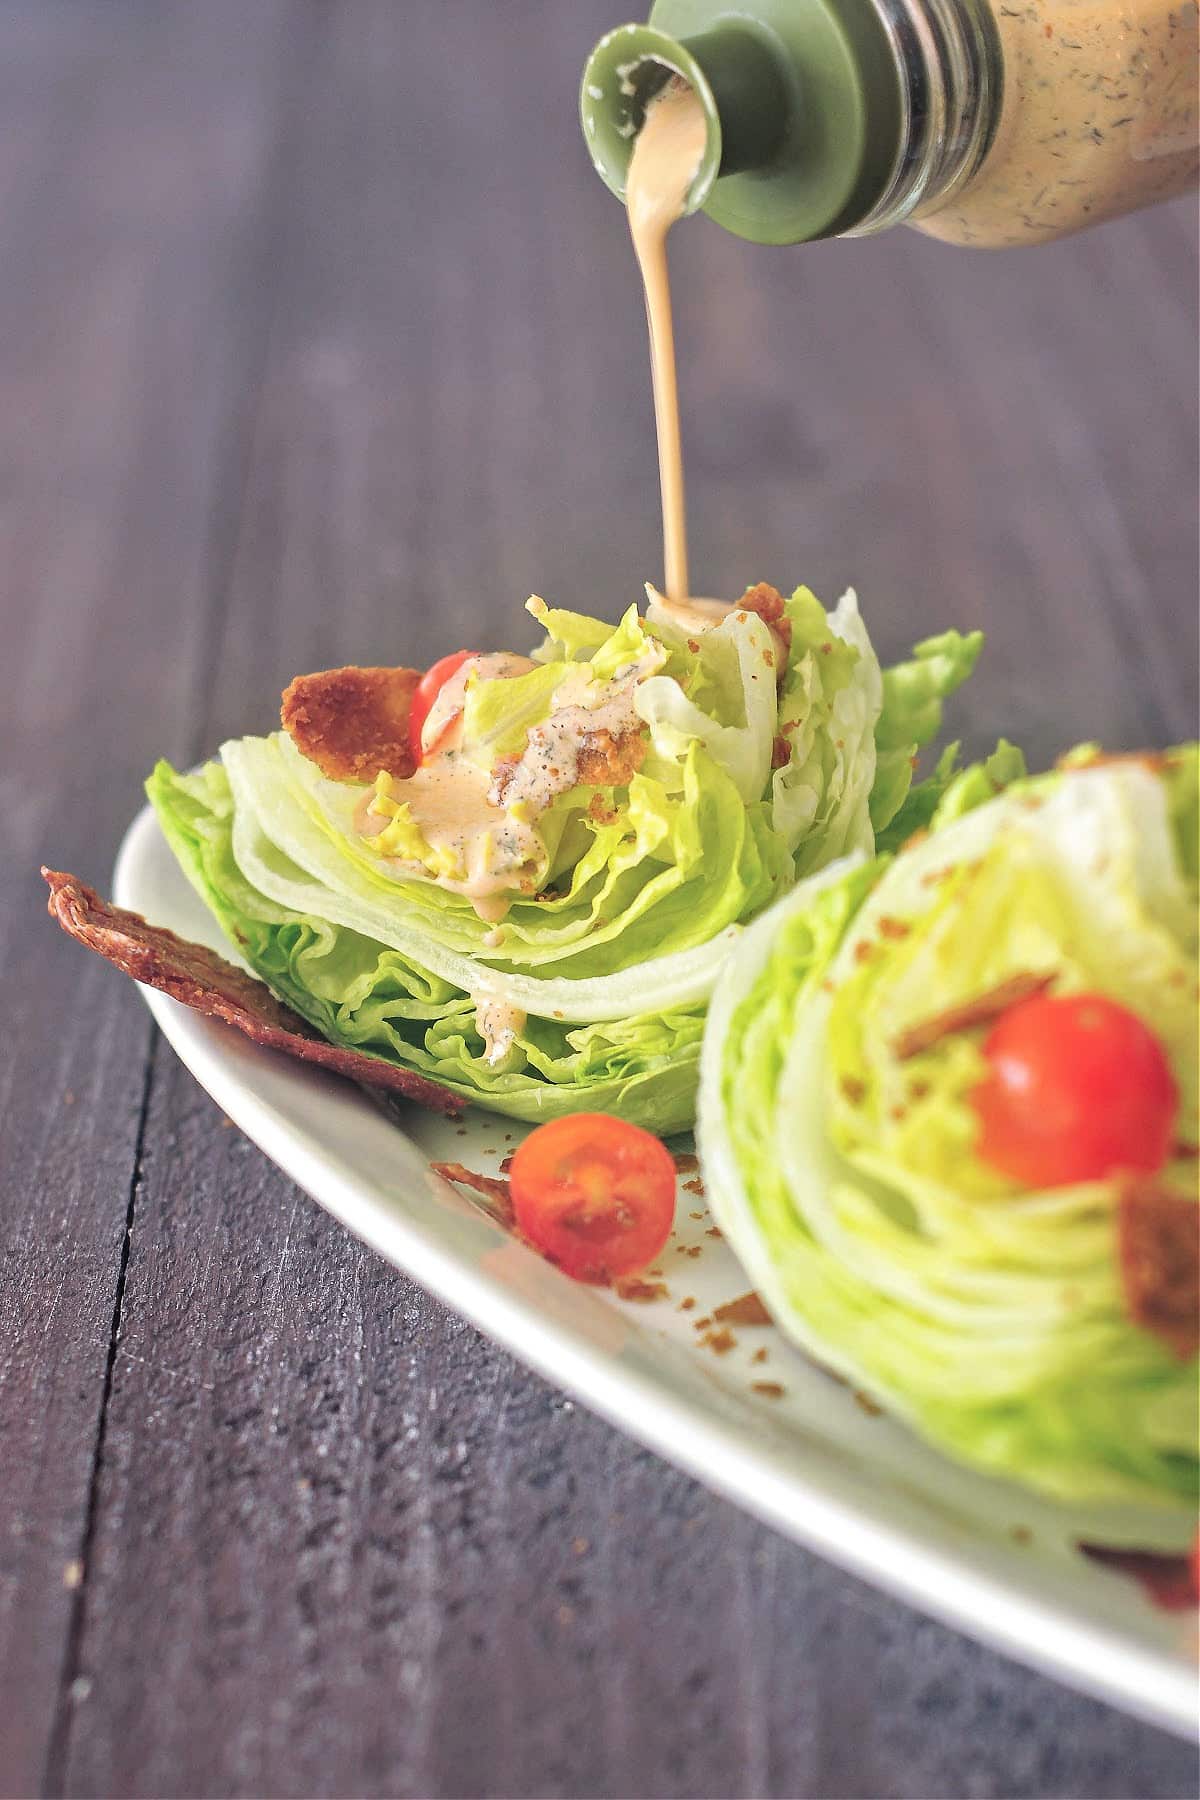 chipotle ranch dressing being poured over one mini wedge salad on a long white platter, one large piece of vegan bacon underneath the wedge, sliced grape tomato scattered on the wedge and plate.